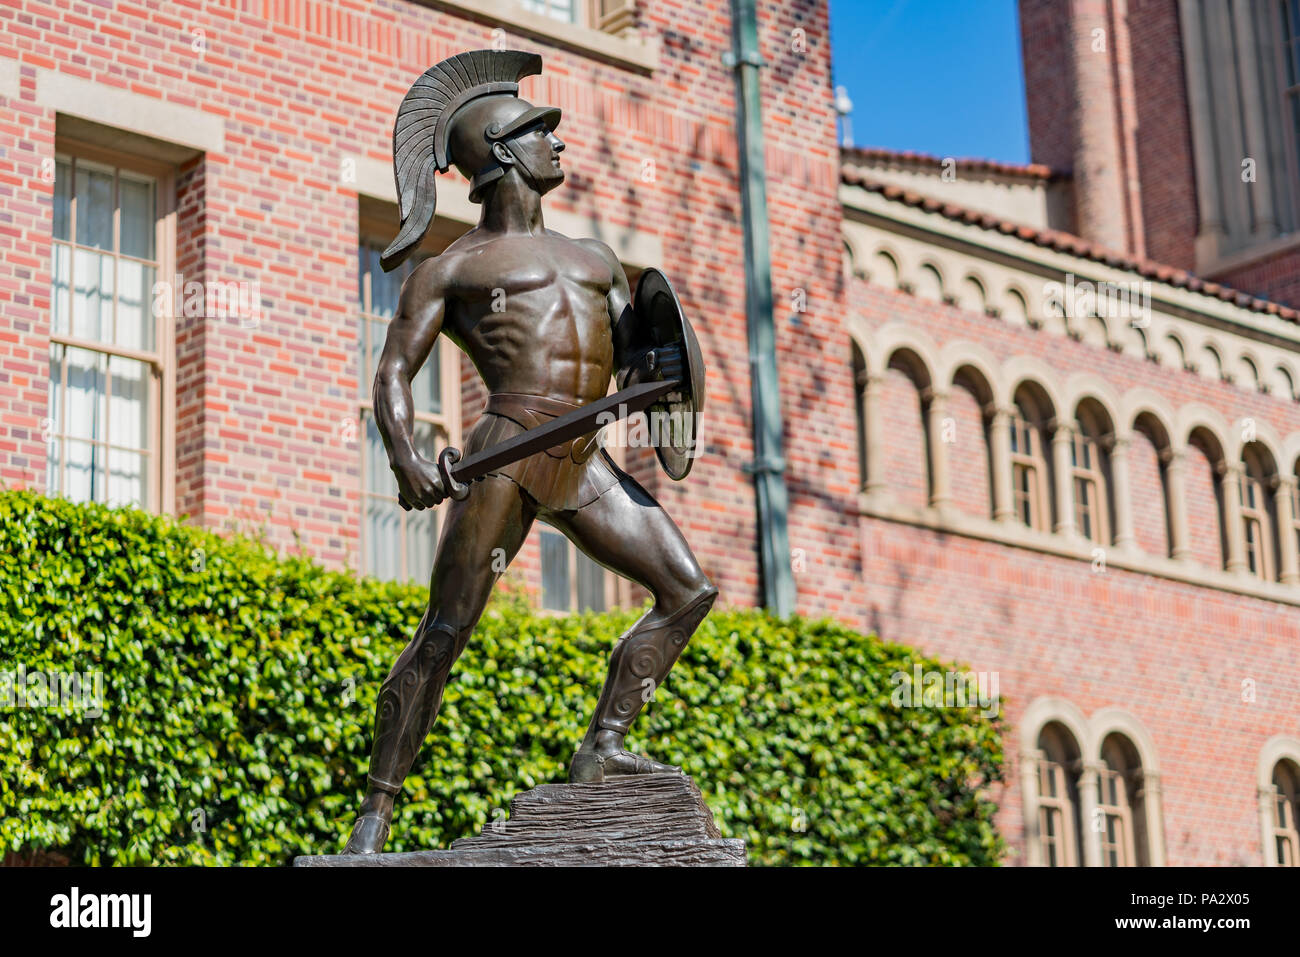 Los Angeles, MAR 29: The famous Trojan statue and Bovard Aministration on MAR 29, 2018 at Los Angeles, California Stock Photo